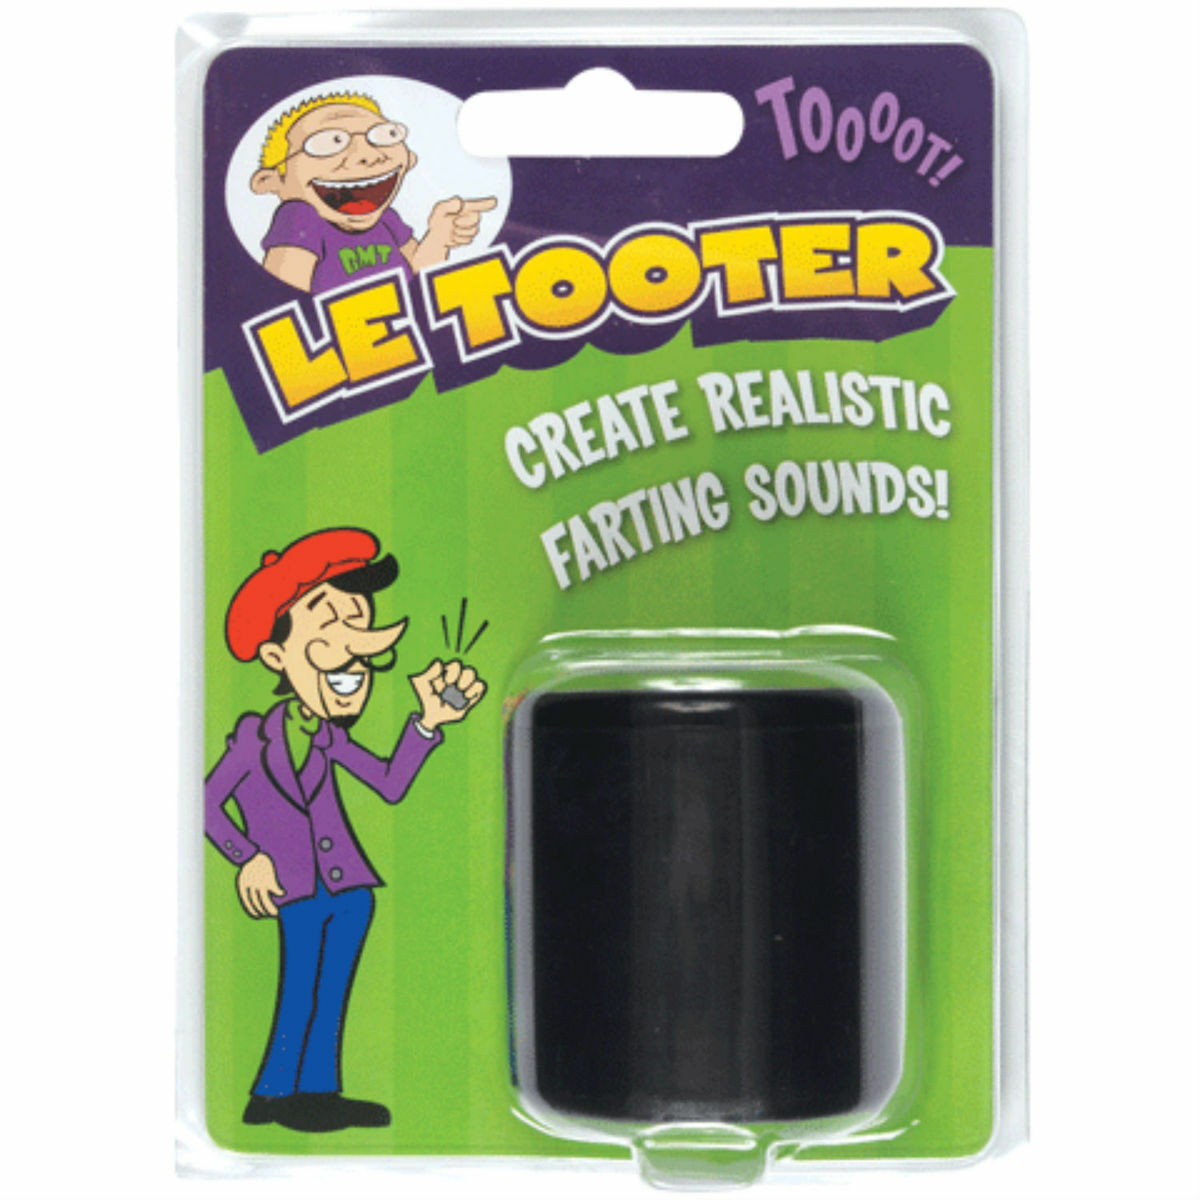 Le Tooter Create Realistic Farting Sounds